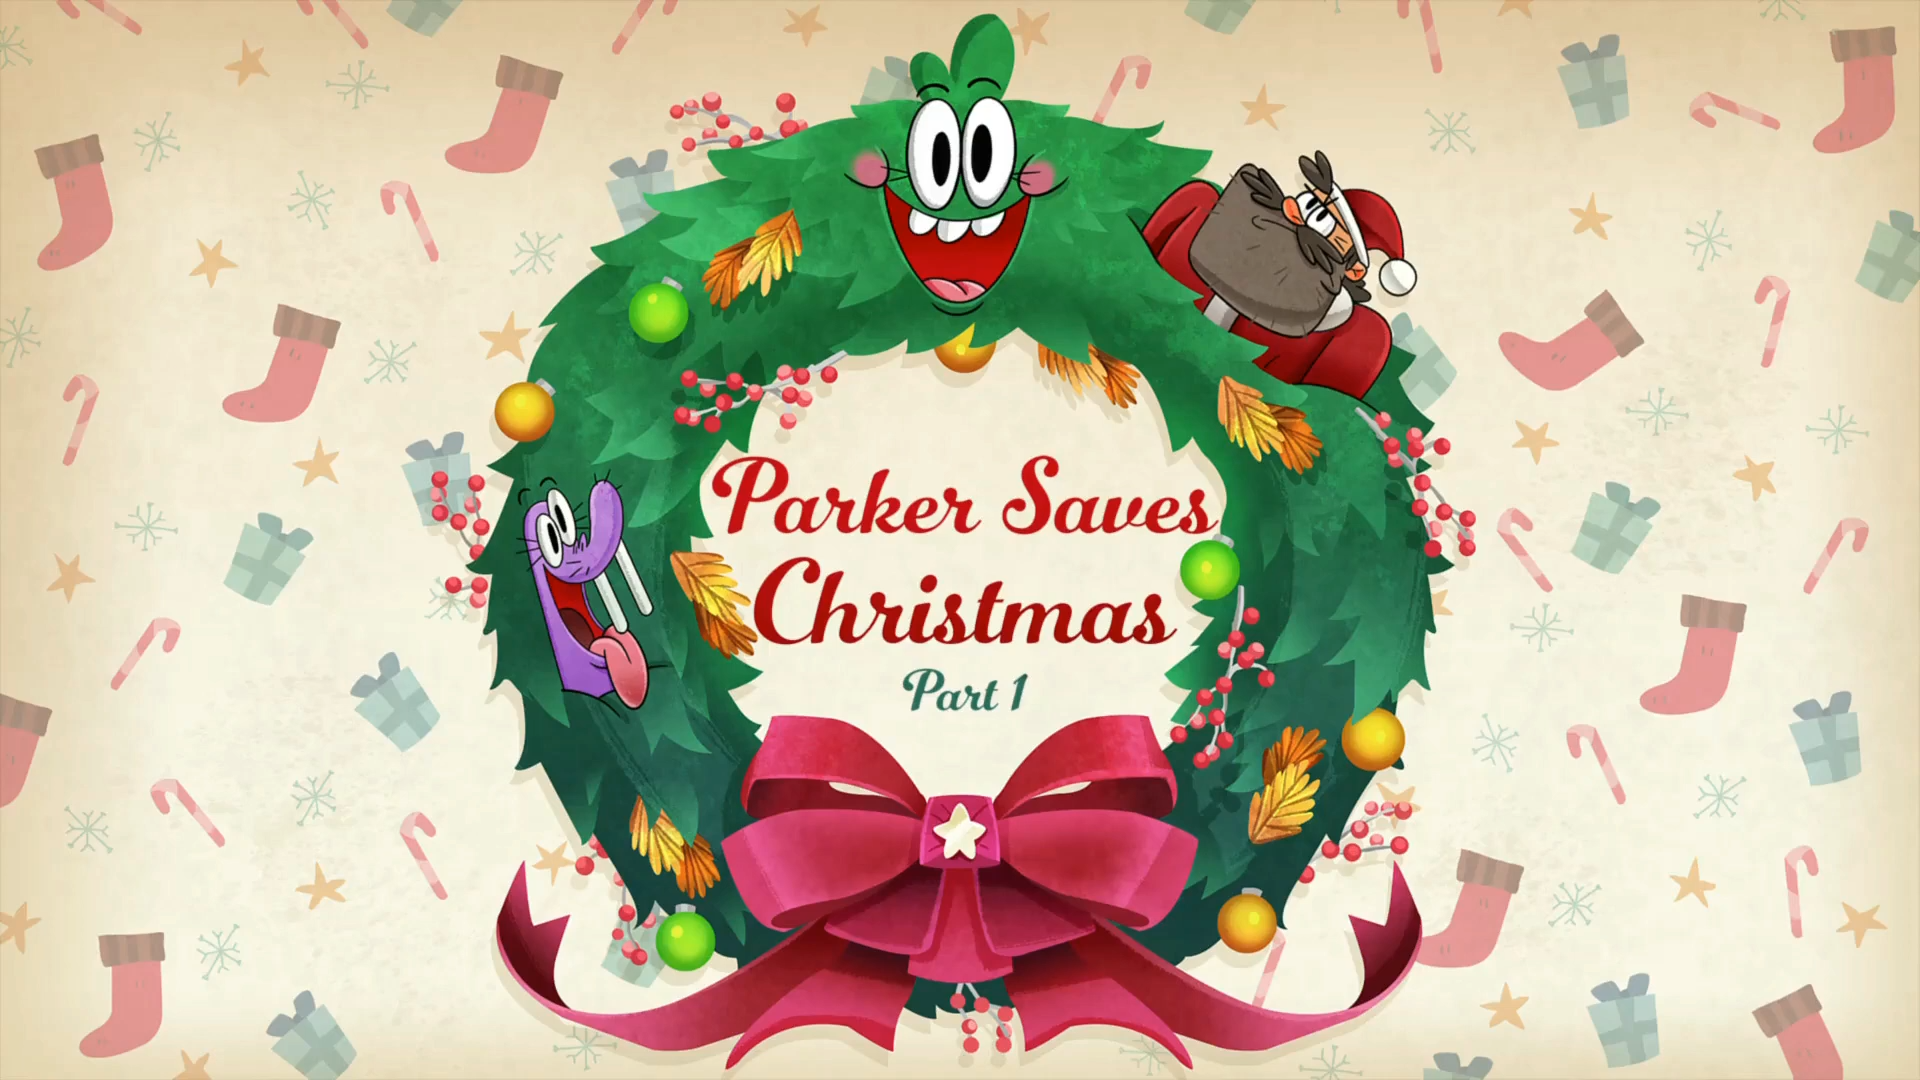 https://static.wikia.nocookie.net/christmasspecials/images/8/8f/Parker_Saves_Christmas_%28Part_1%29.png/revision/latest?cb=20211204165028